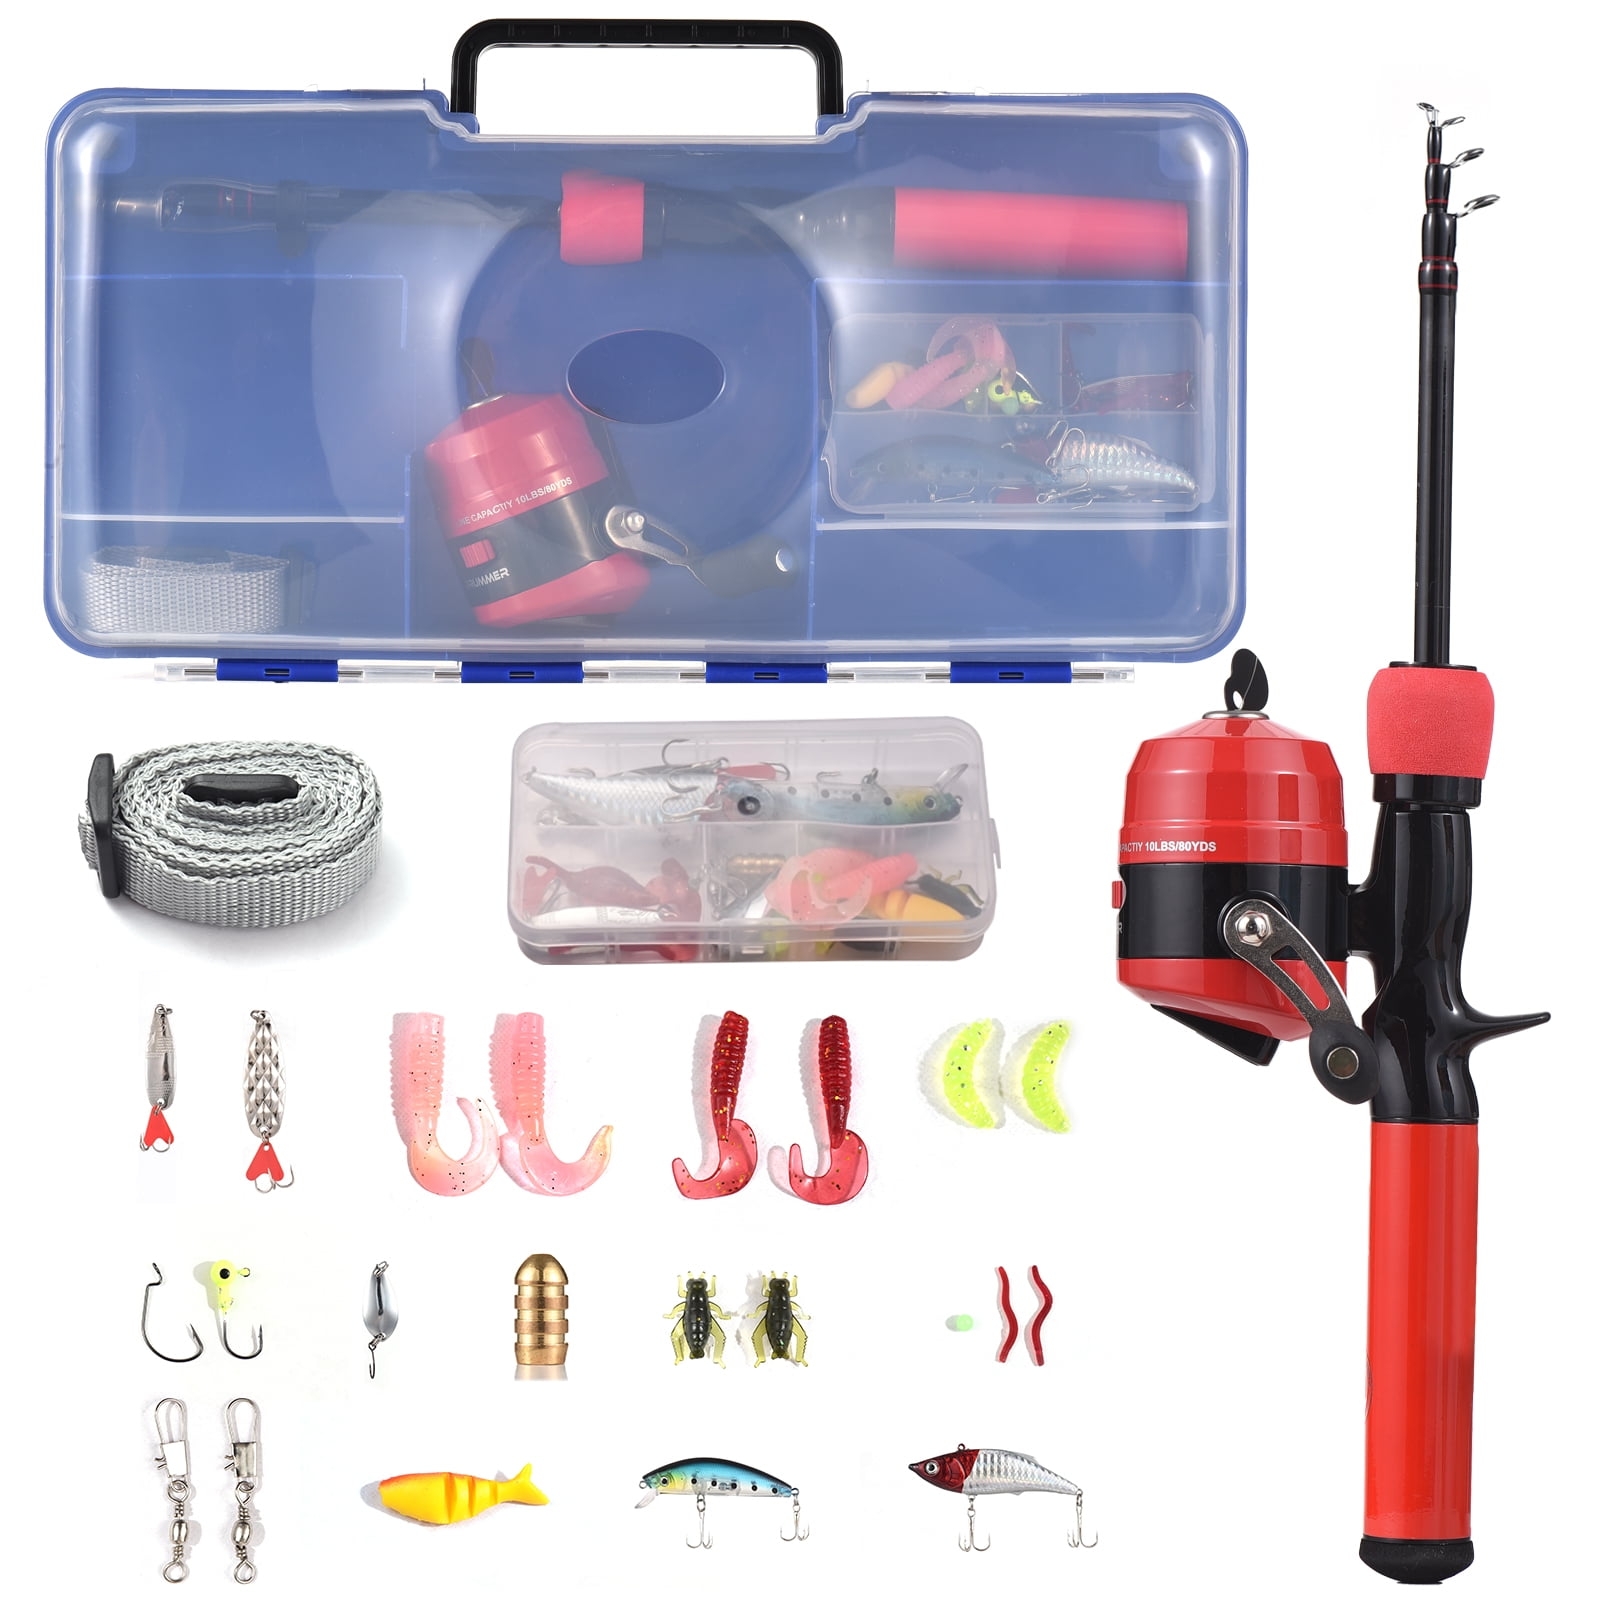 Dynwaveca Child Fishing Rod Complete Set With Lures Traveling Kid Fishing Pole Portable Telescopic Fishing Rod And Reel Combo Kits For Boys Girls Viol